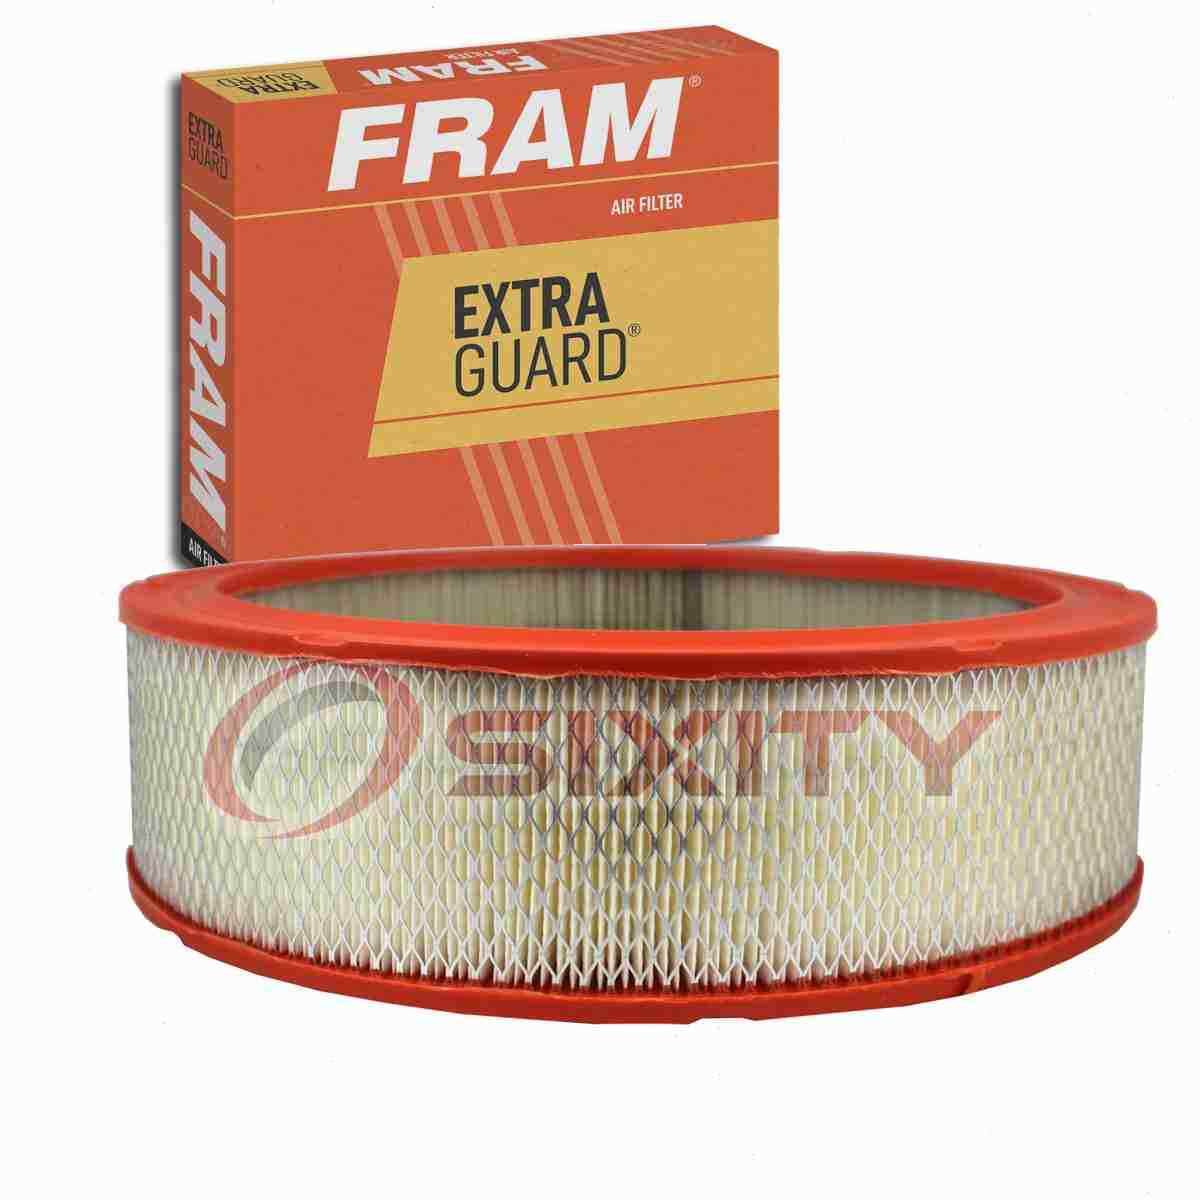 FRAM Extra Guard Air Filter for 1978-1987 GMC Caballero Intake Inlet wj